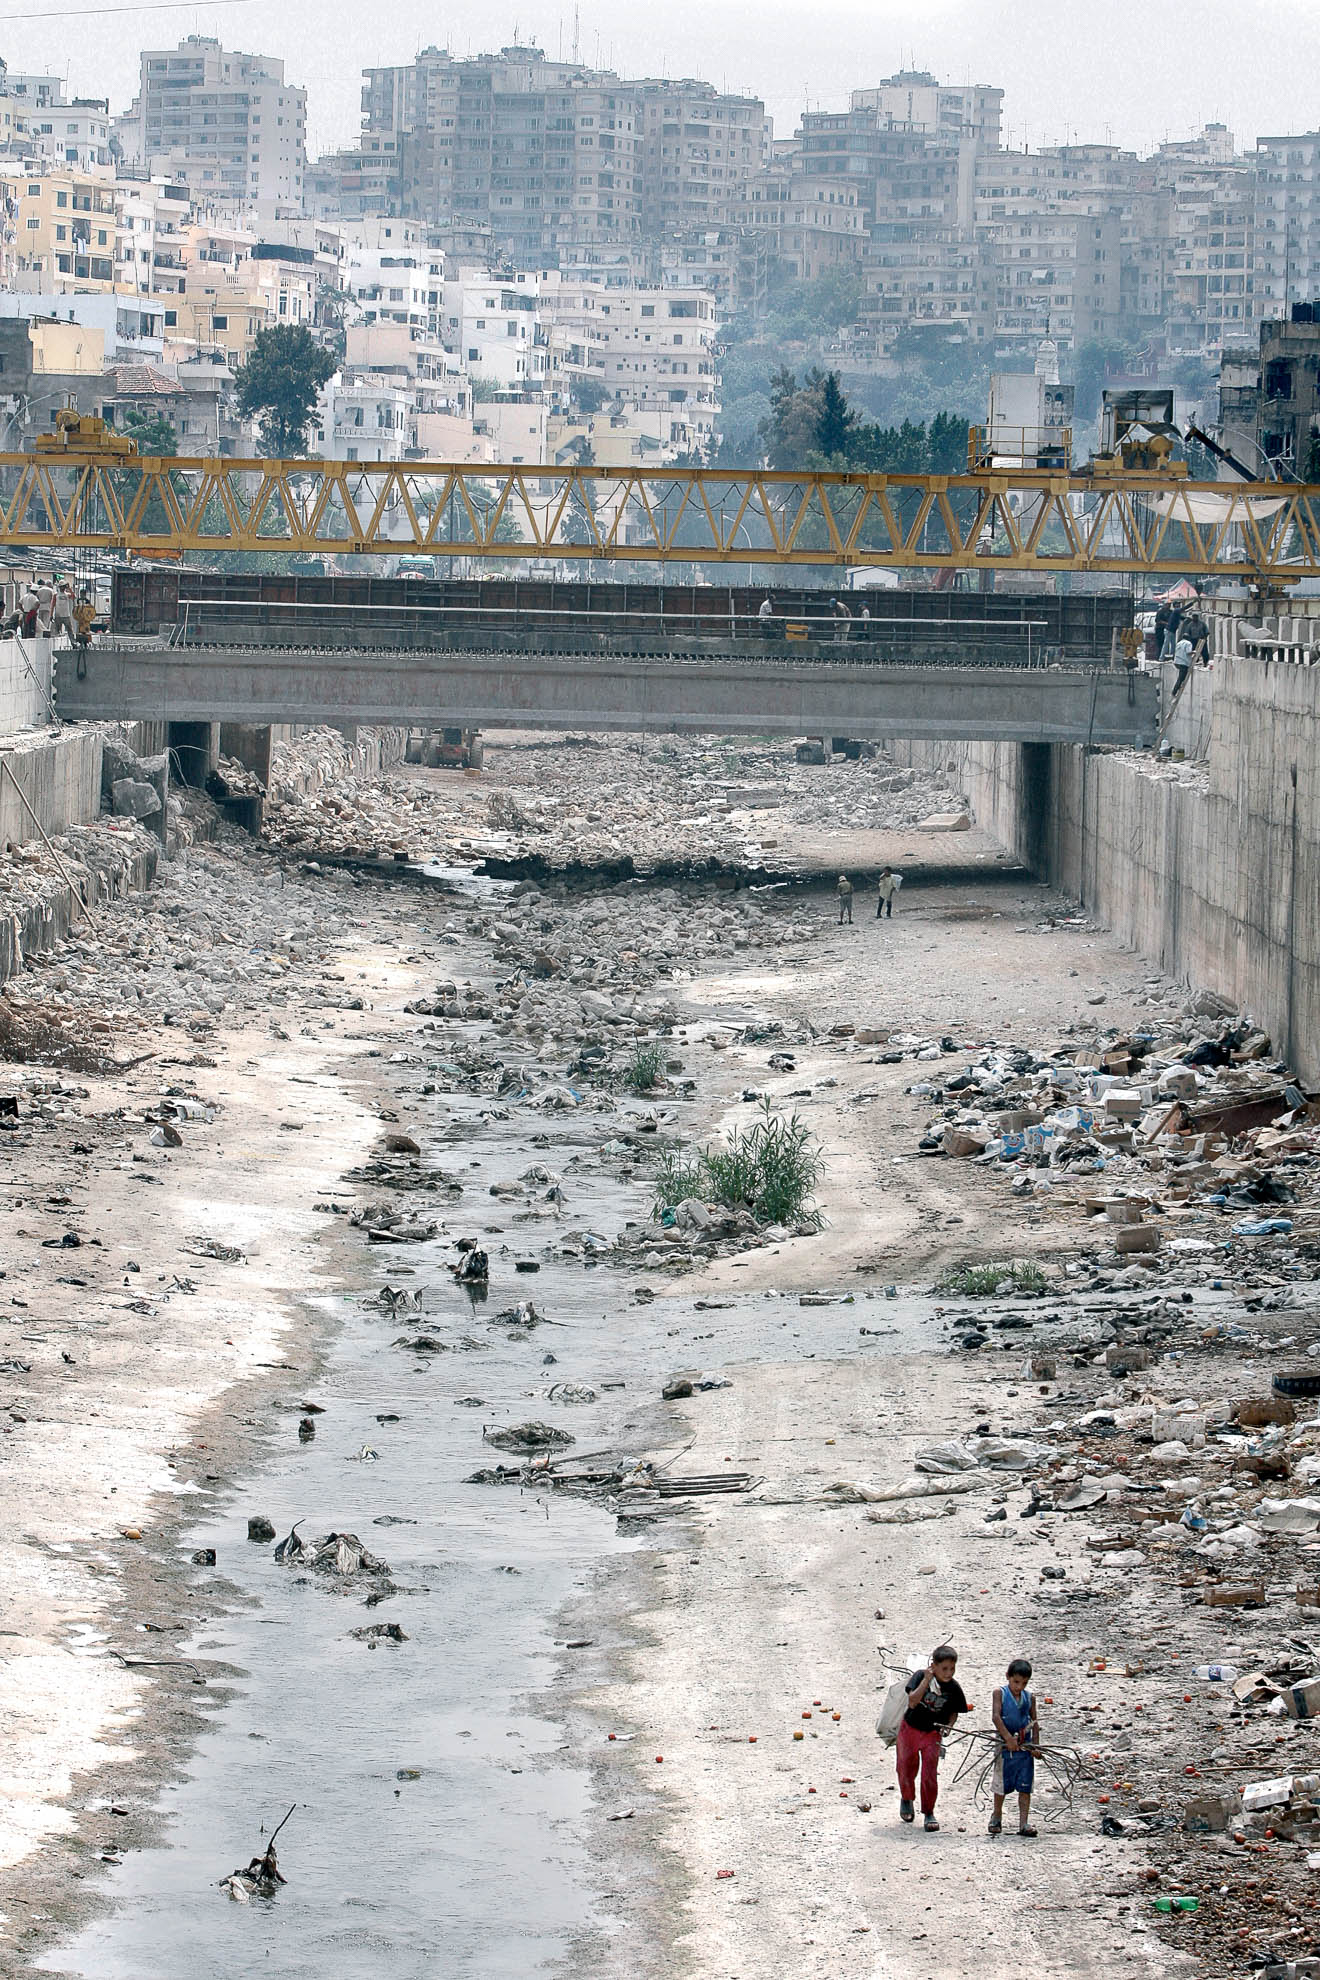 The photo shows a river in the city of Tripoli. Scores of children live off scraps of garbage tossed there by merchants and people living near the river. Tripoli is in the north of the country. Apart from the poverty and the unhealthy living conditions, the city is the scene of bitter fighting between different Islamic militias, Sunni and Shiite, which set off bombs and shoot at one another in the city street.